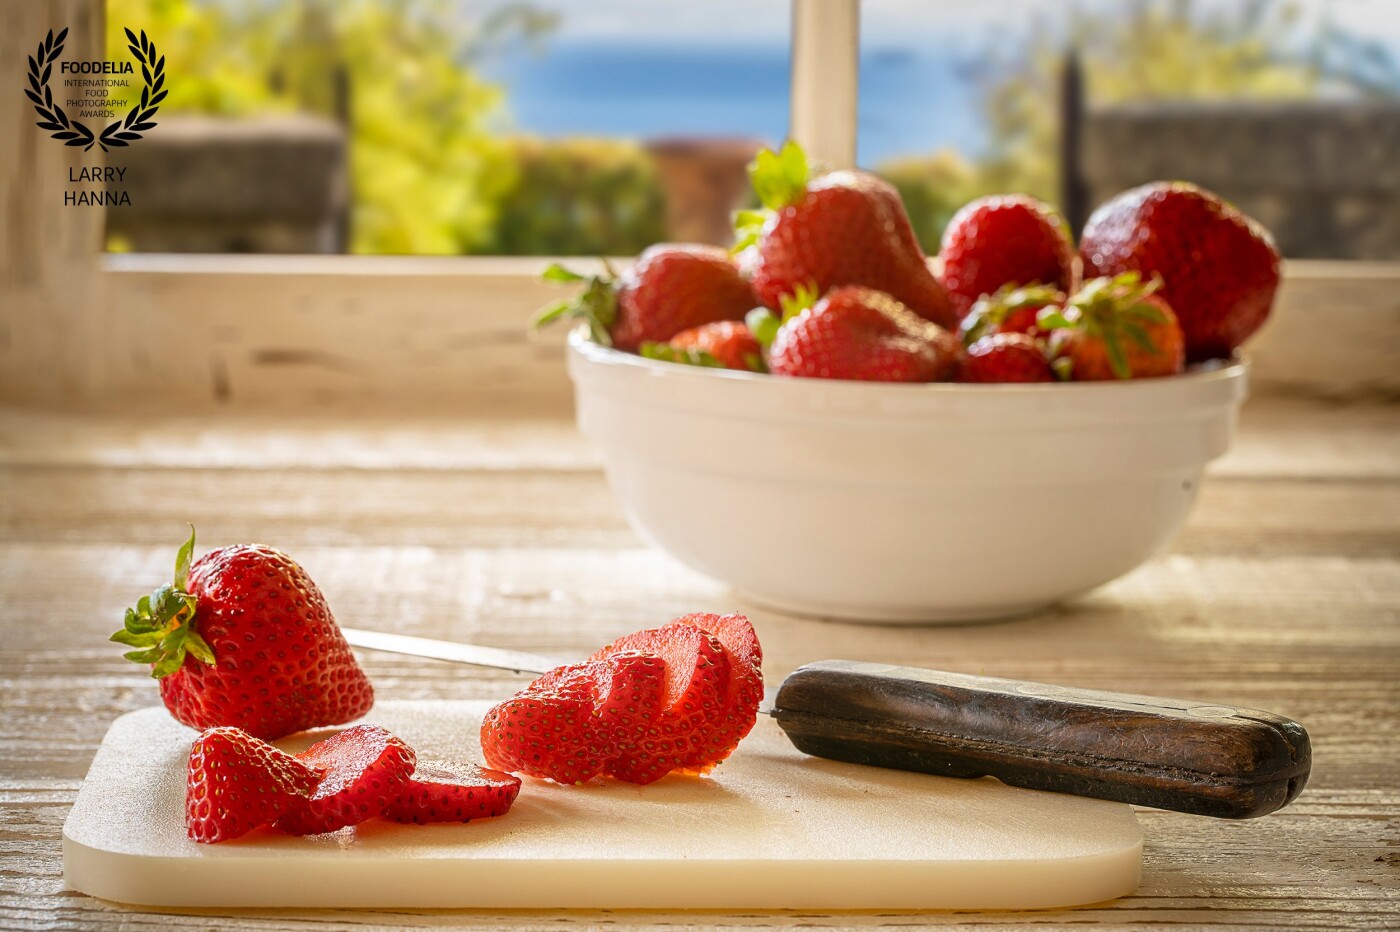 Cruising through the grocery store, the beauty of the fresh strawberries caught my eye.  I had just made a new white wood surface for my food shots and immediately though of creating a fresh morning look of strawberries being cut by the kitchen window.  I made both the surface and the window frame and layered in a view I had captured on a recent trip to Italy.